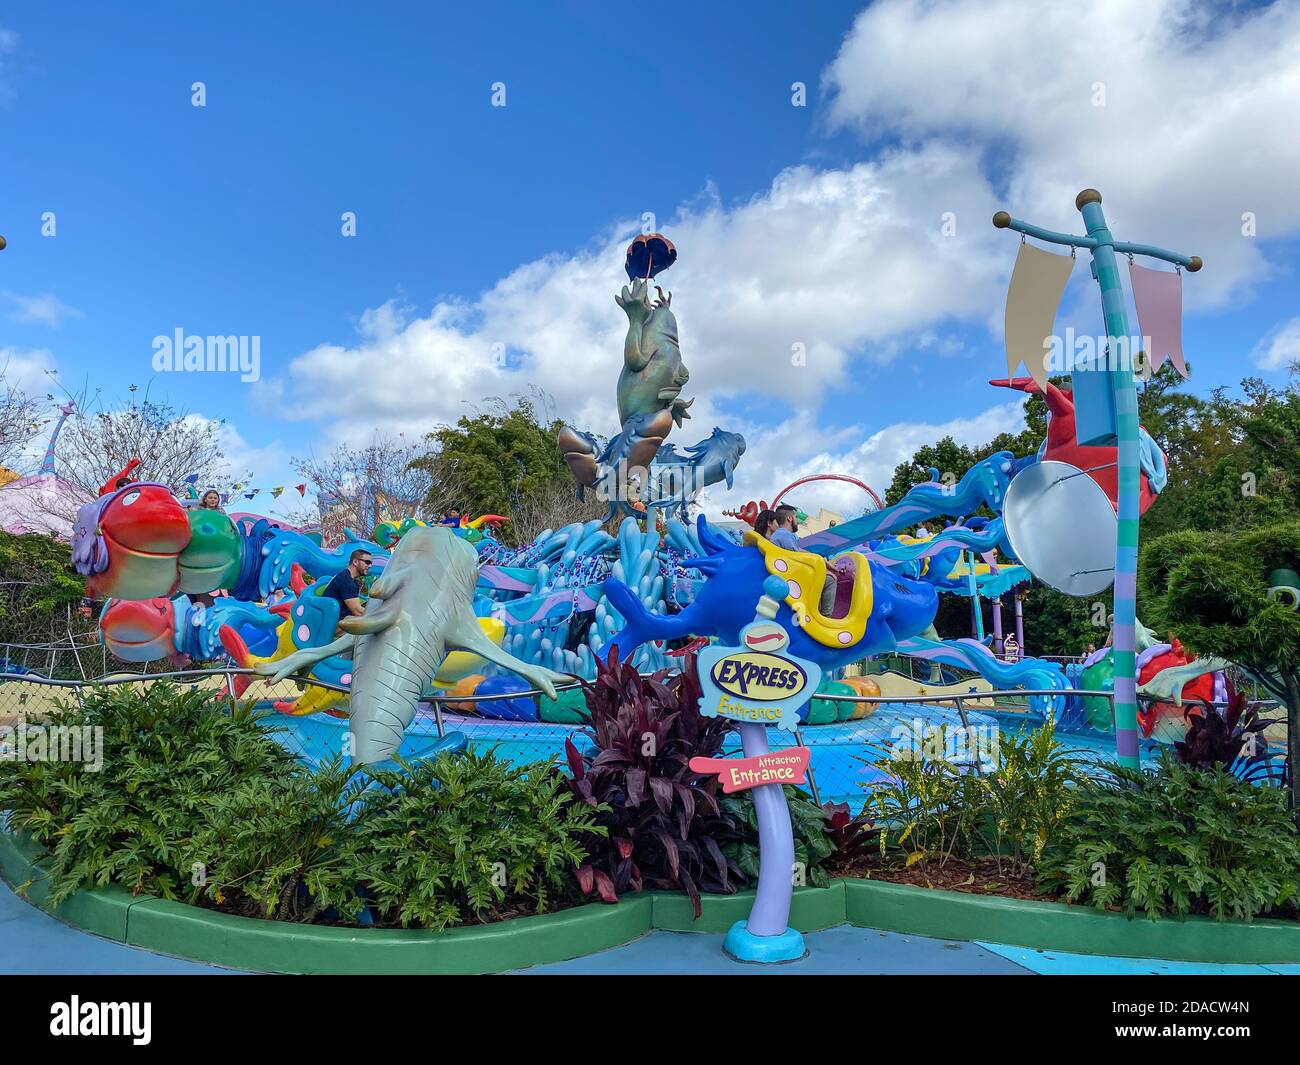 https://c8.alamy.com/comp/2DACW4N/orlandoflusa-21620-the-one-fish-two-fish-red-fish-blue-fish-cat-in-the-hat-ride-at-universal-studios-theme-park-in-orlando-florida-2DACW4N.jpg